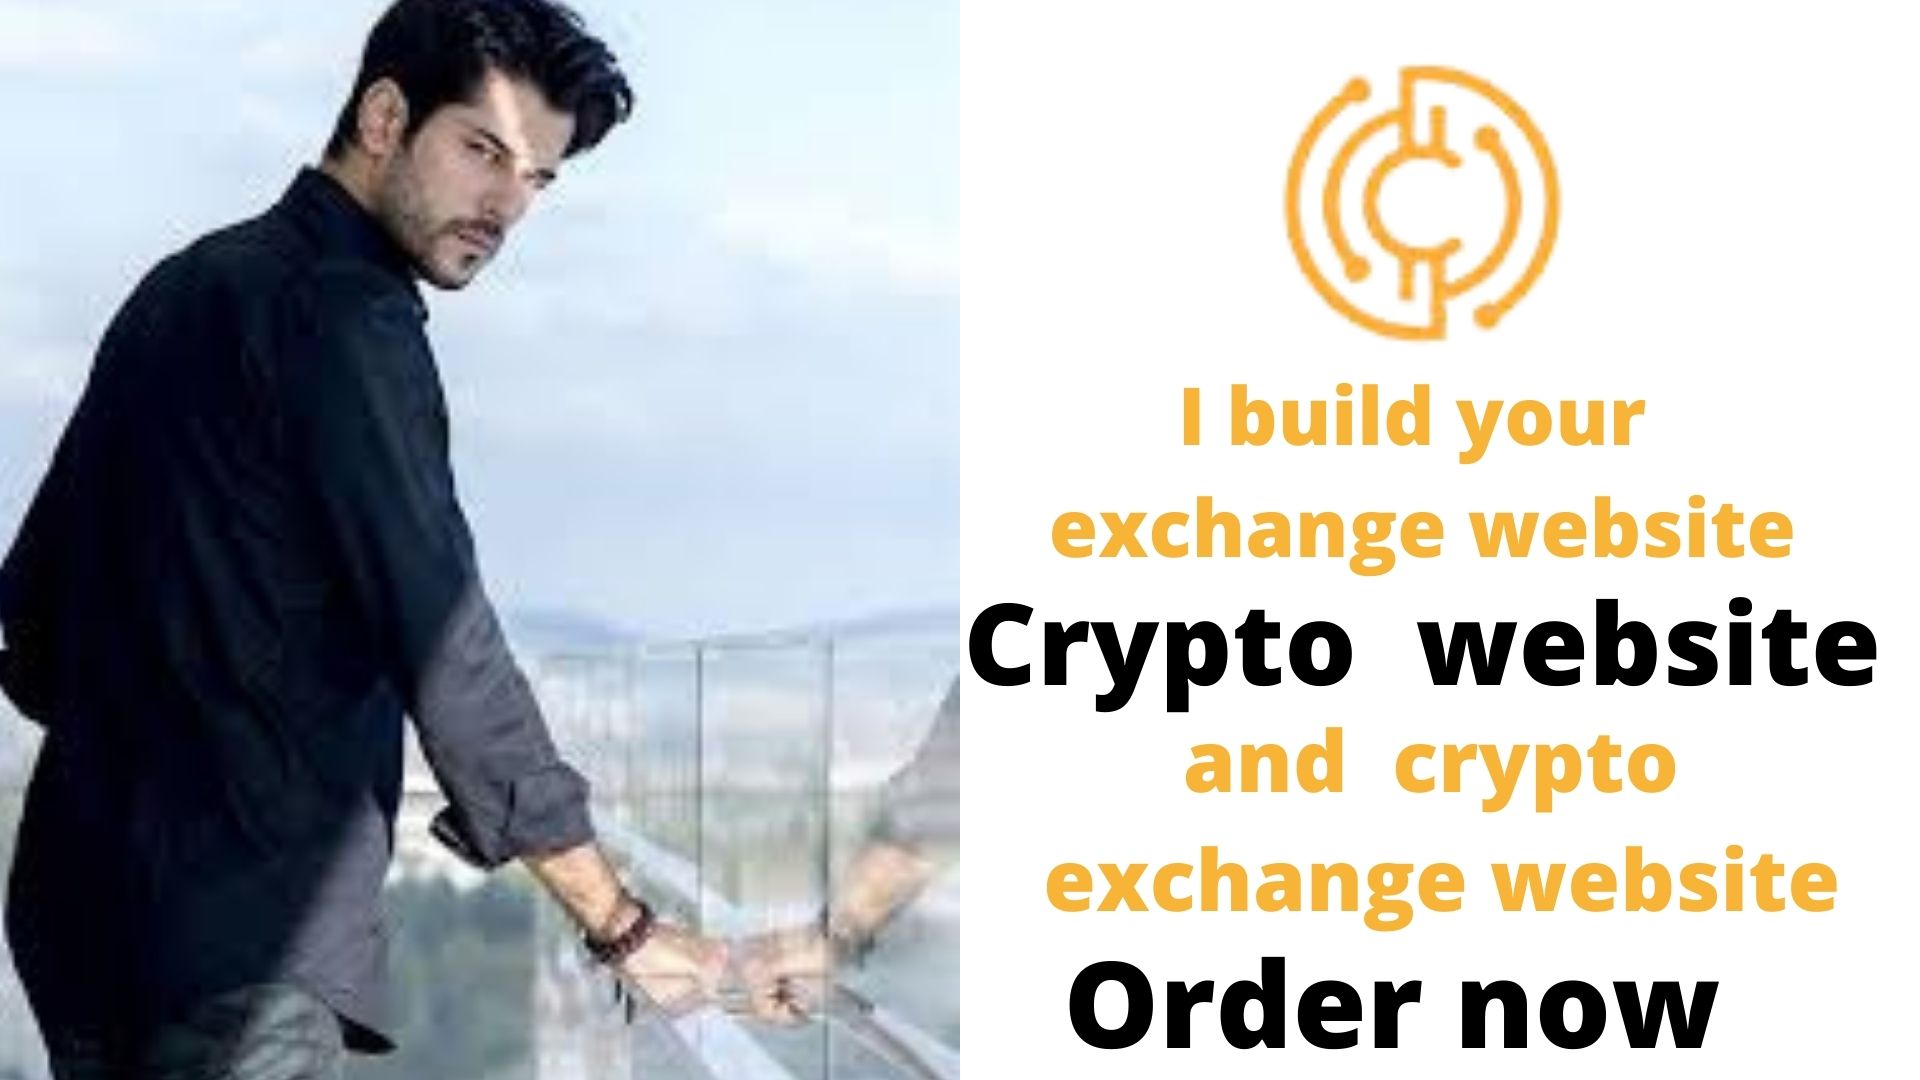 I will build your exchange website, crypto website, crypto exchange website, wallet app, FiverrBox